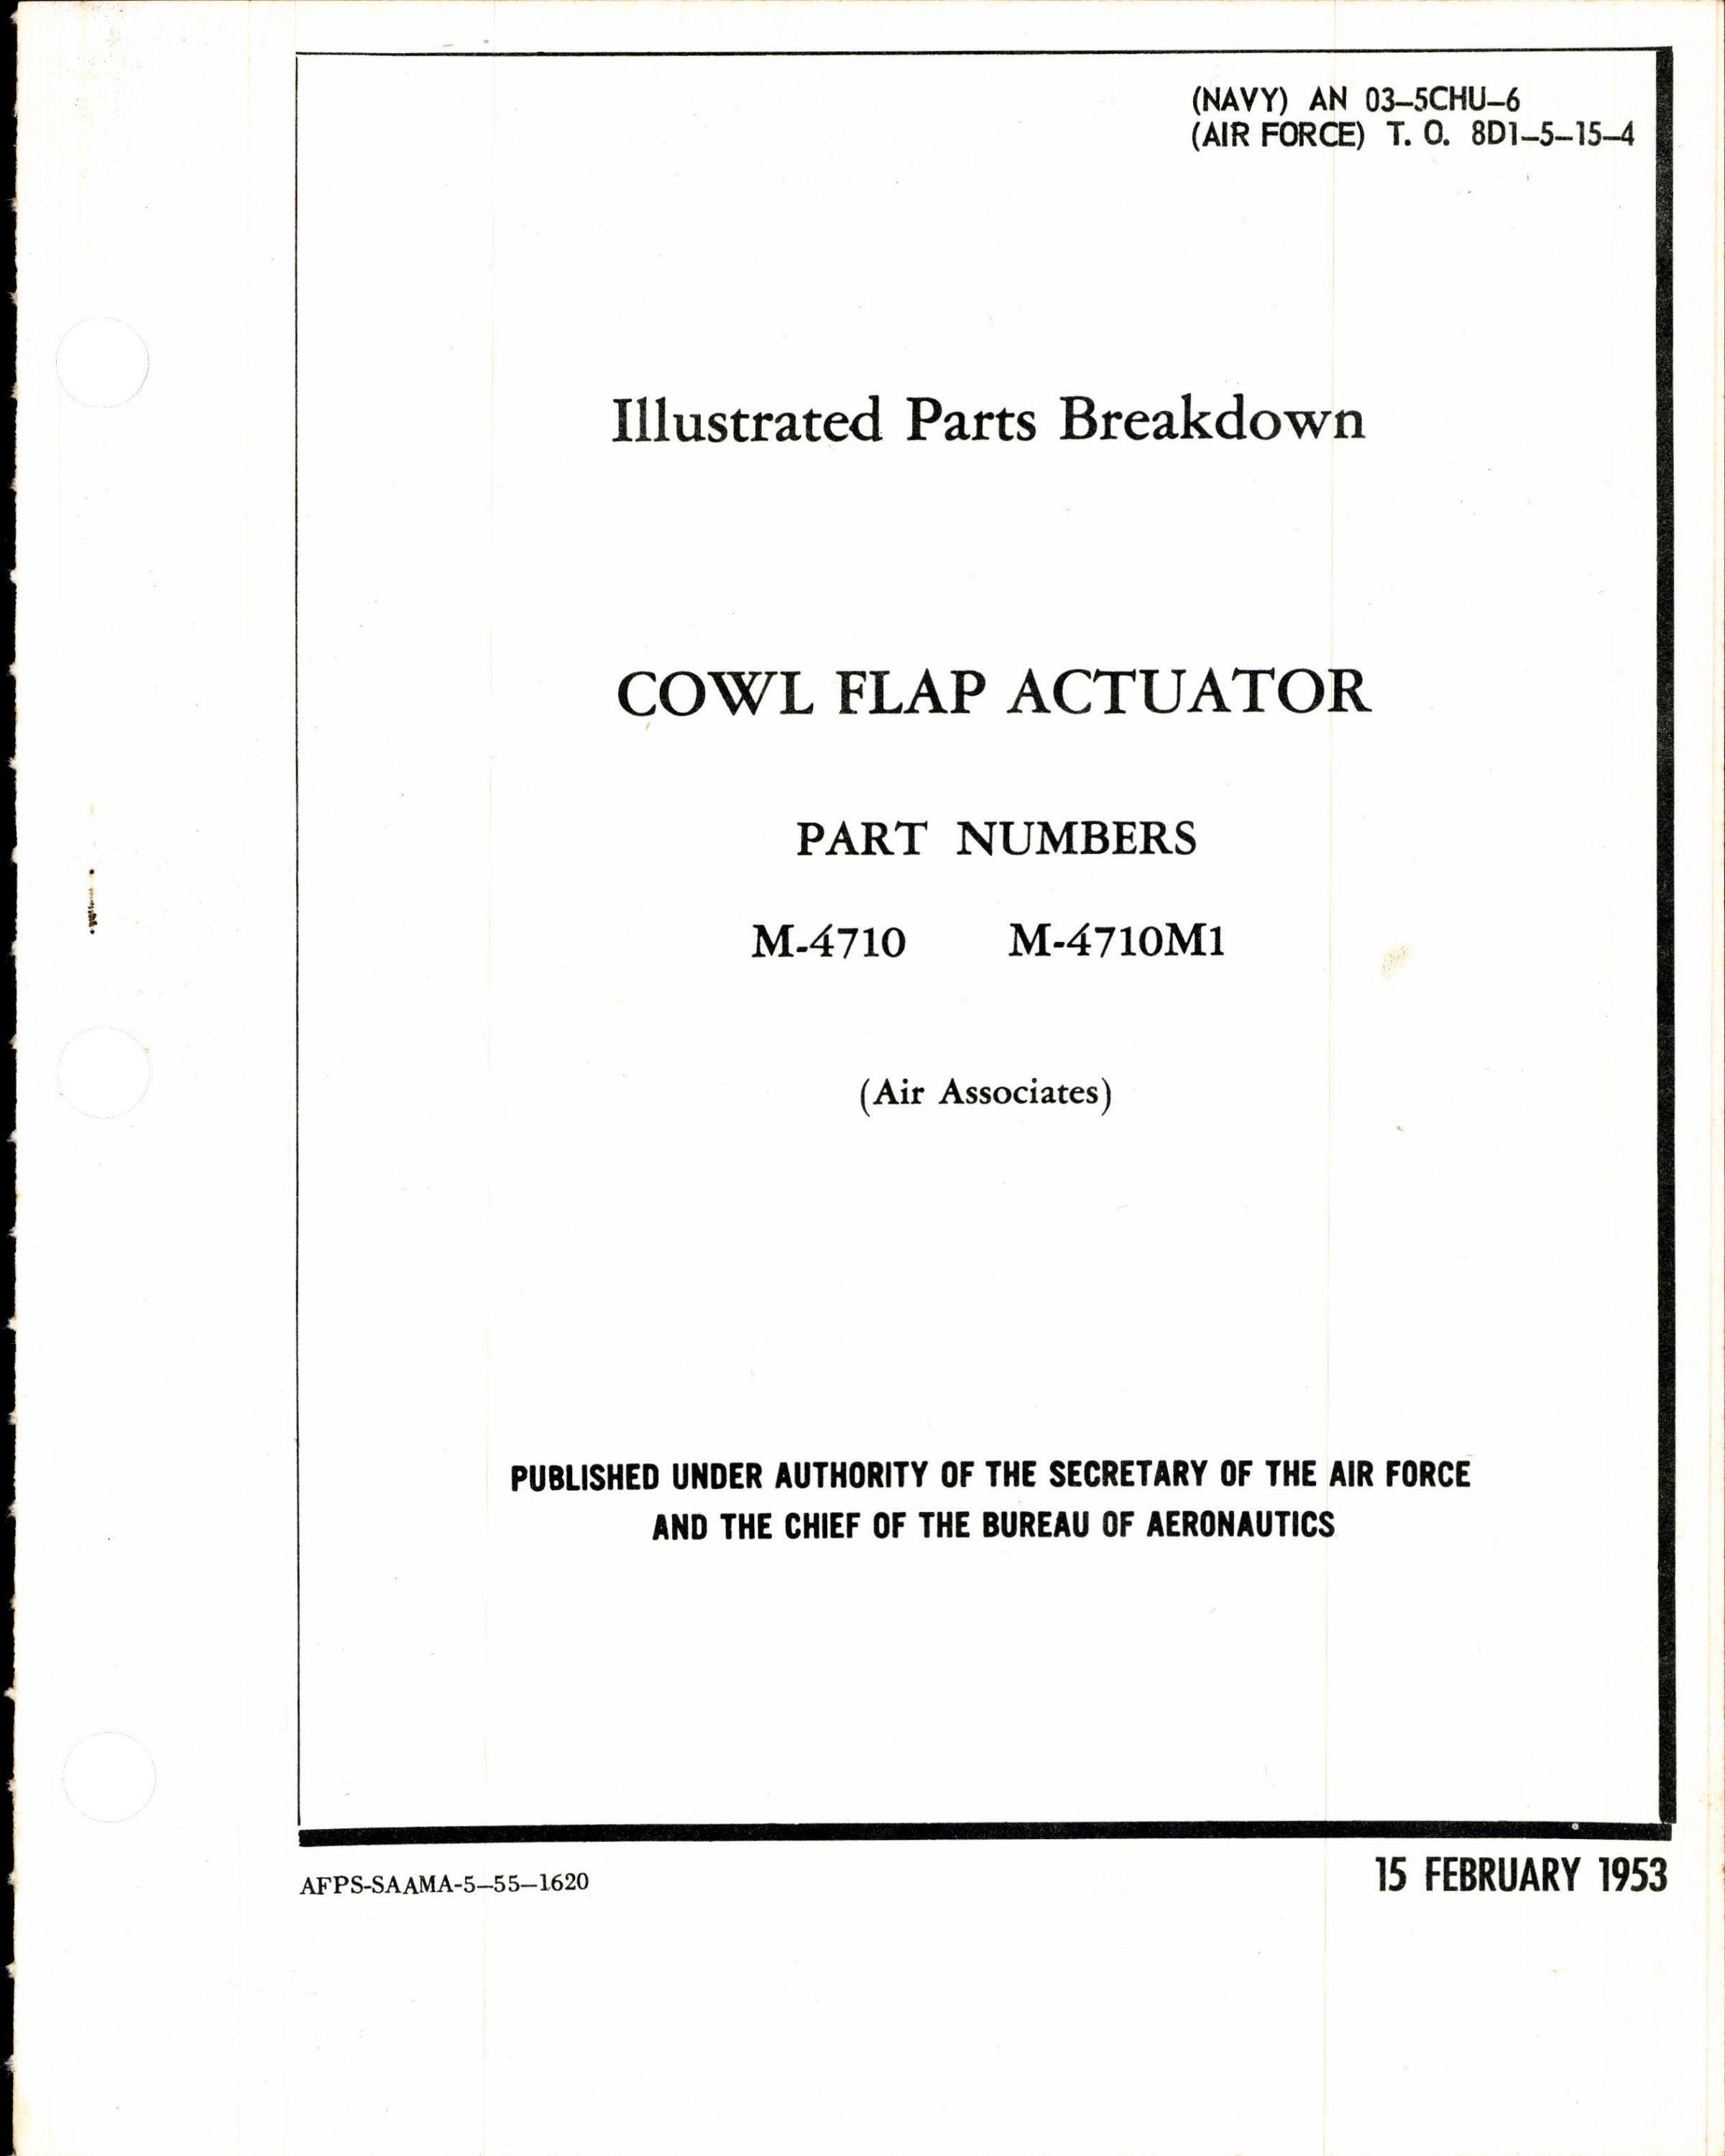 Sample page 1 from AirCorps Library document: Parts Catalog Cowl Flap Actuator Part No M-4710